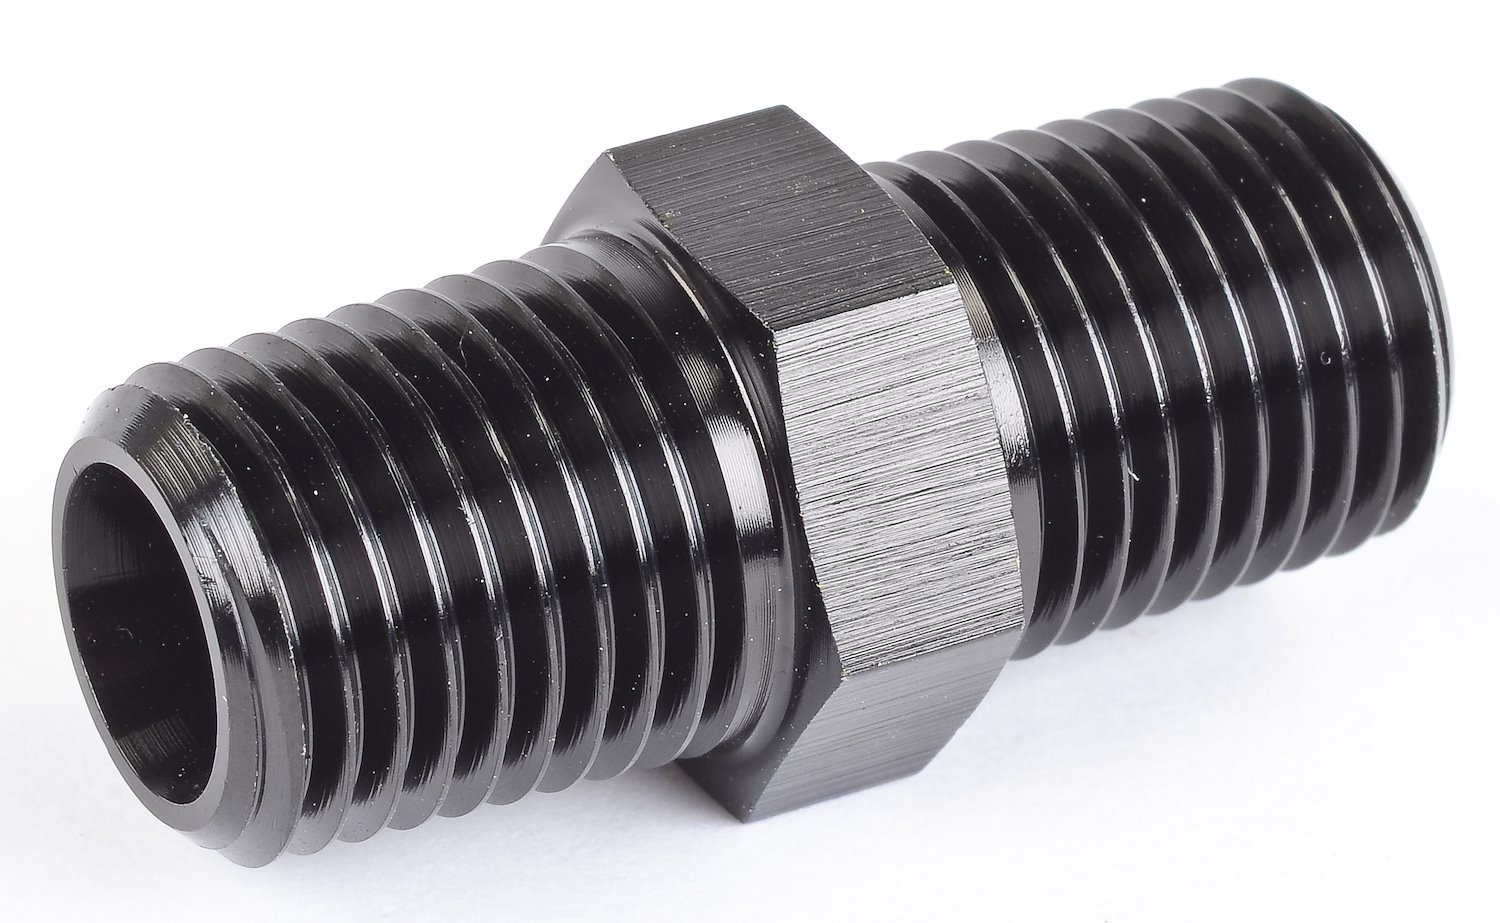 NPT to NPT Straight Union Fitting [1/8 in. NPT Male to 1/8 in. NPT Male, Black]